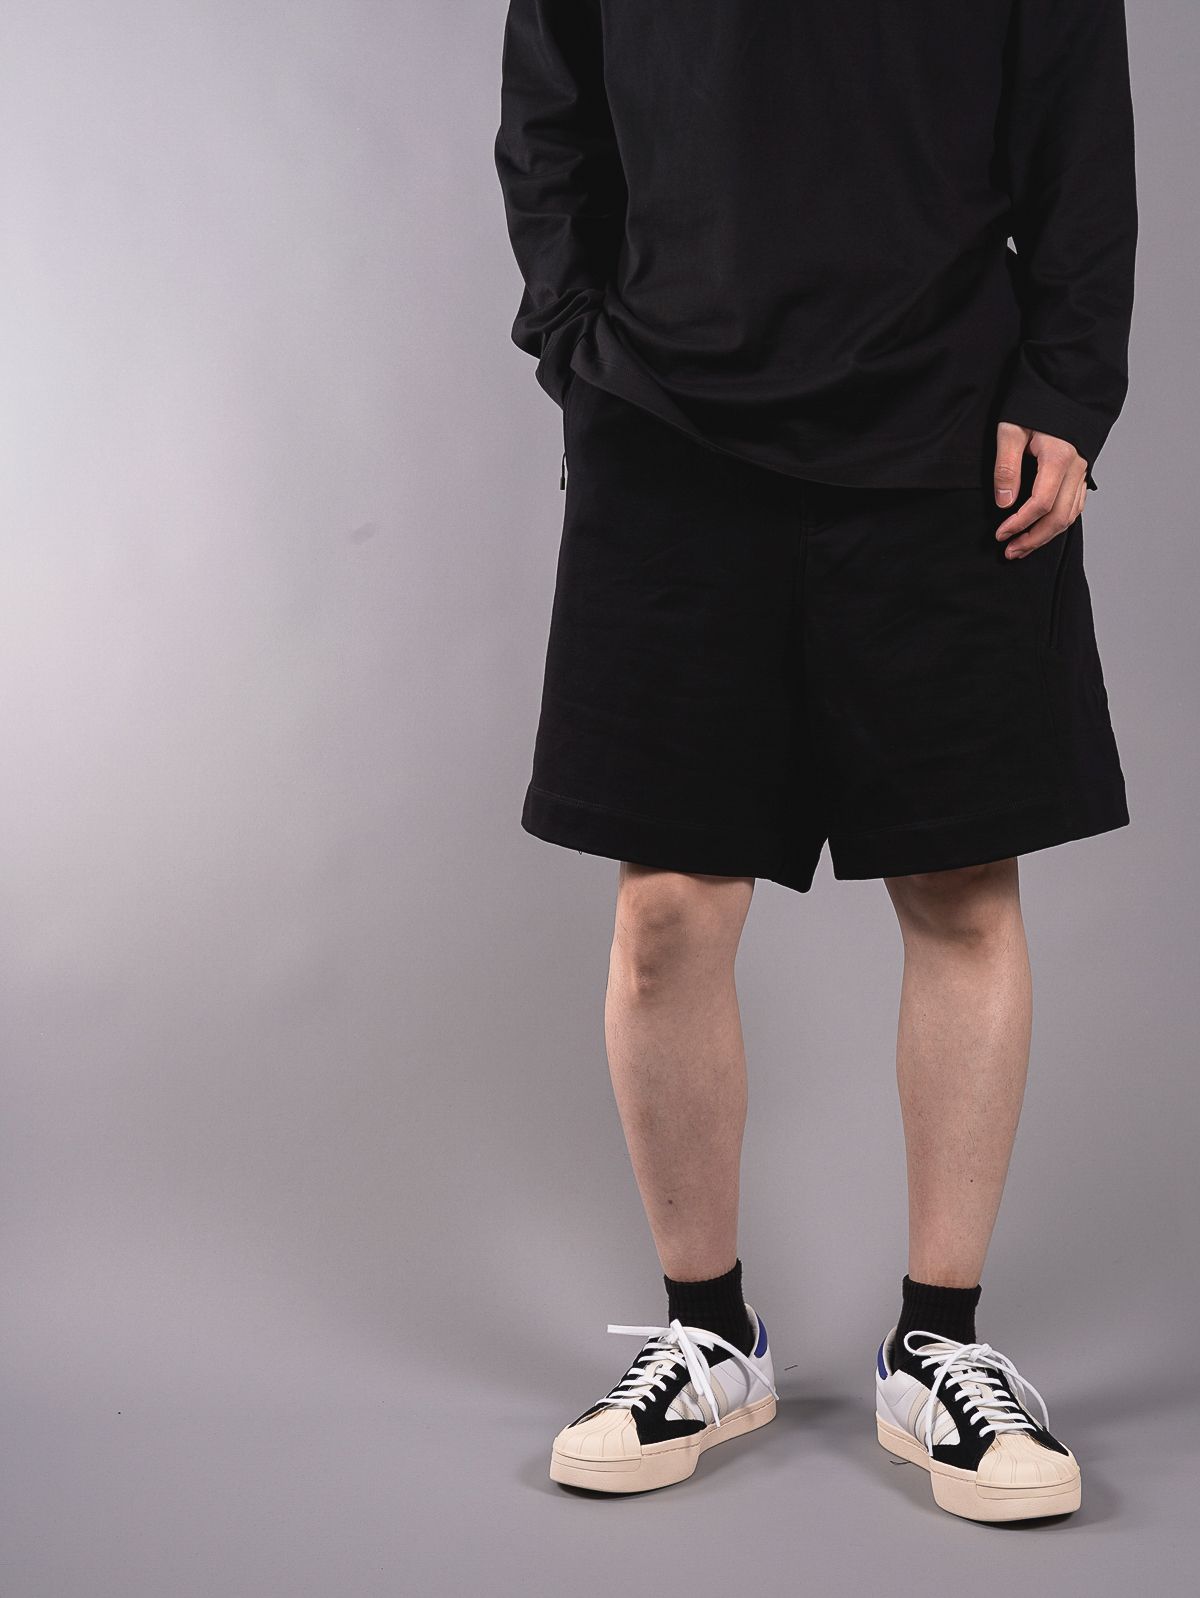 Y-3 - M CLASSIC TERRY UTILITY SHORT PANTS / クラシック テリー